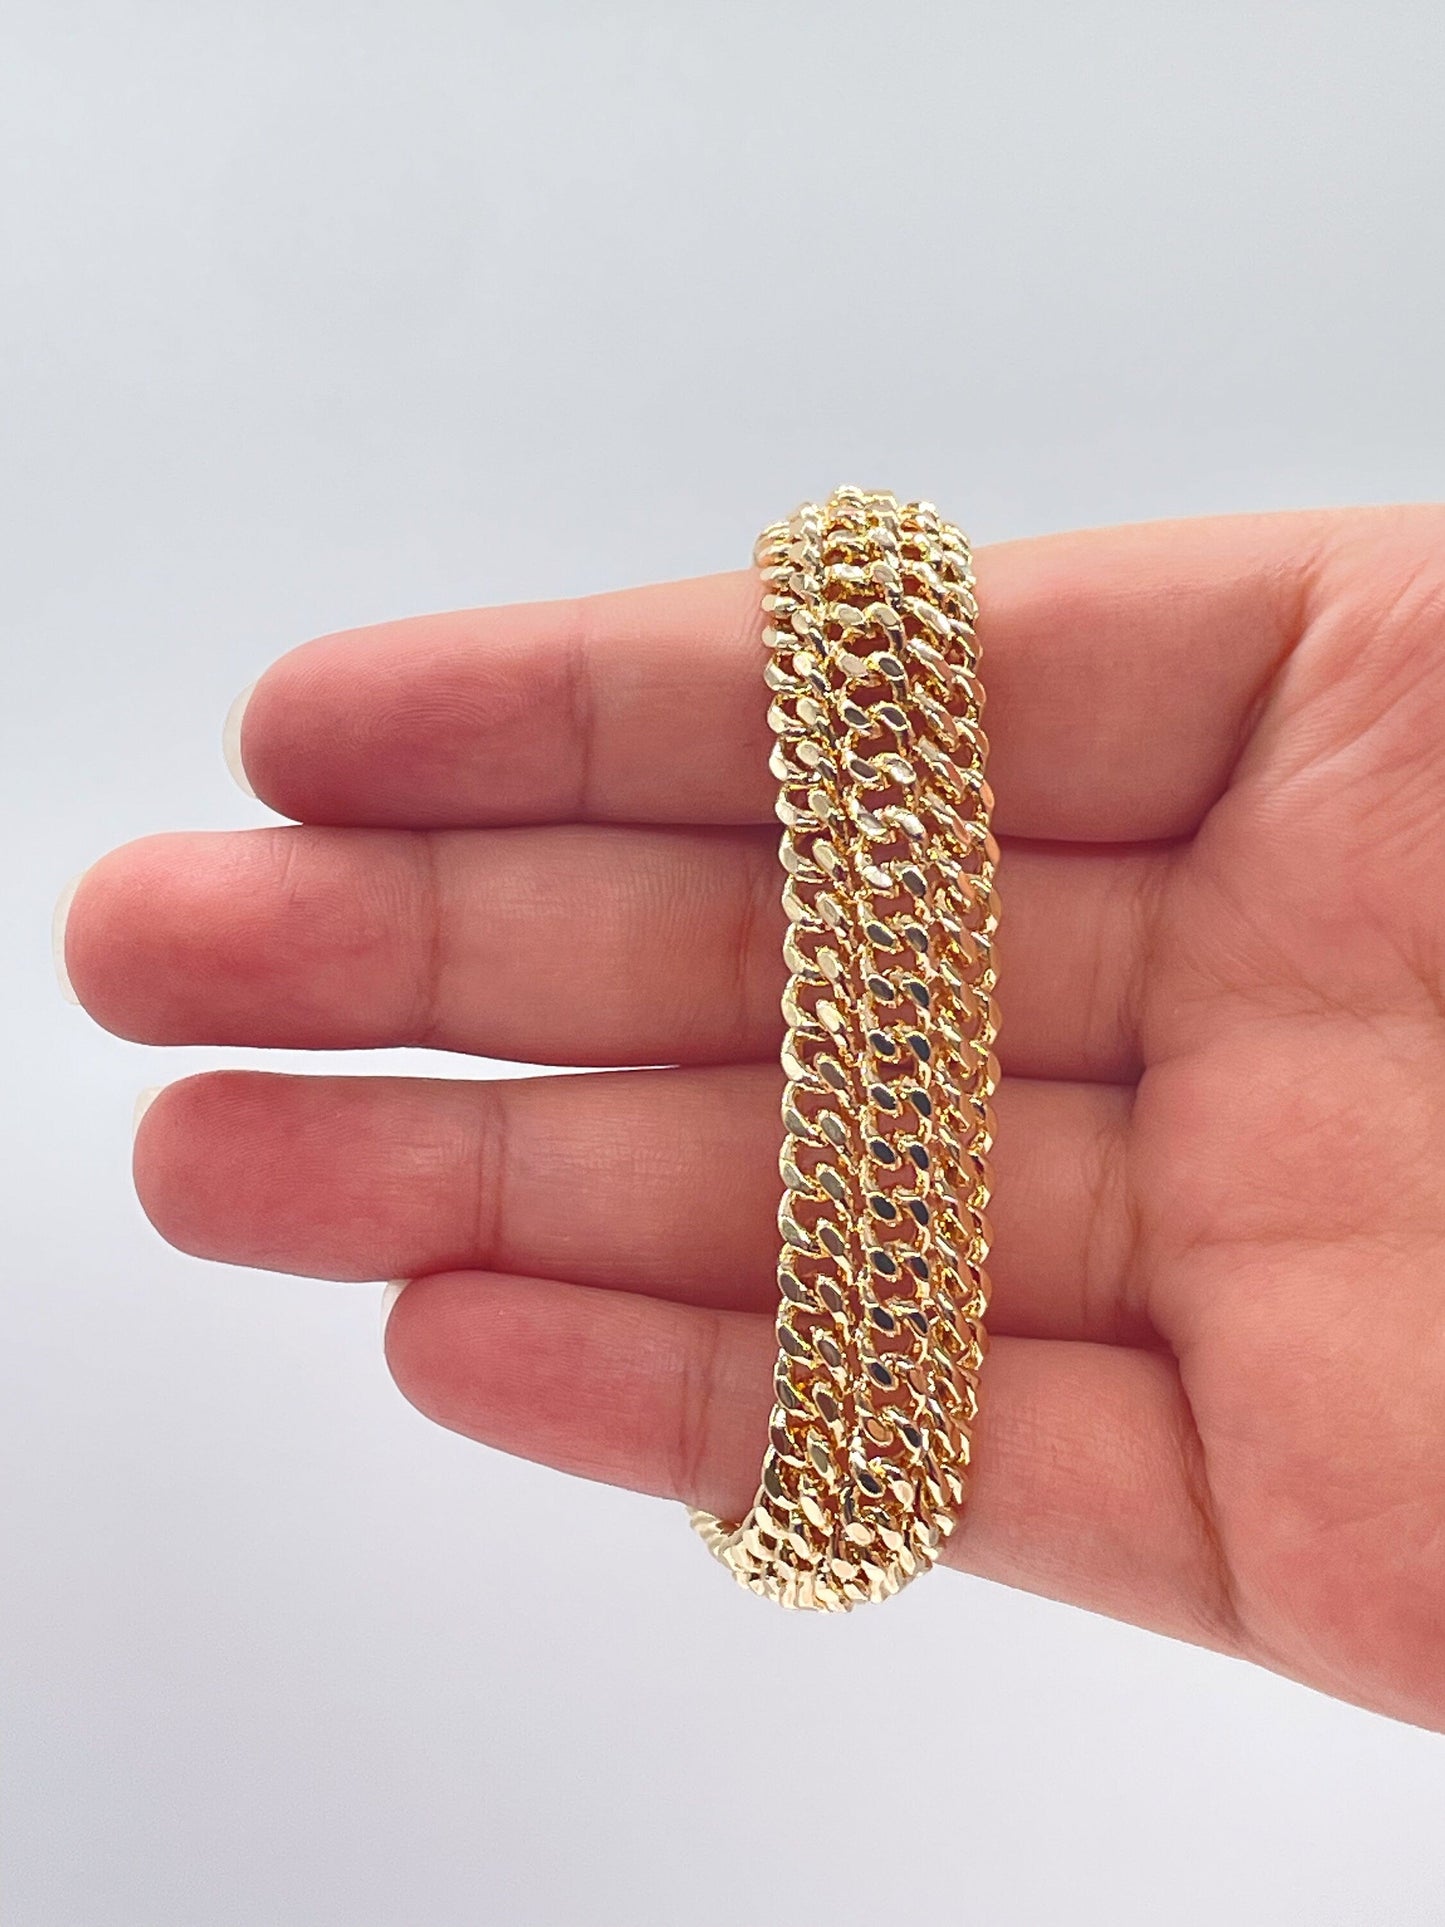 18K Gold Layered Thick Bracelet Feature Three Cuban Link Connected Side by Side